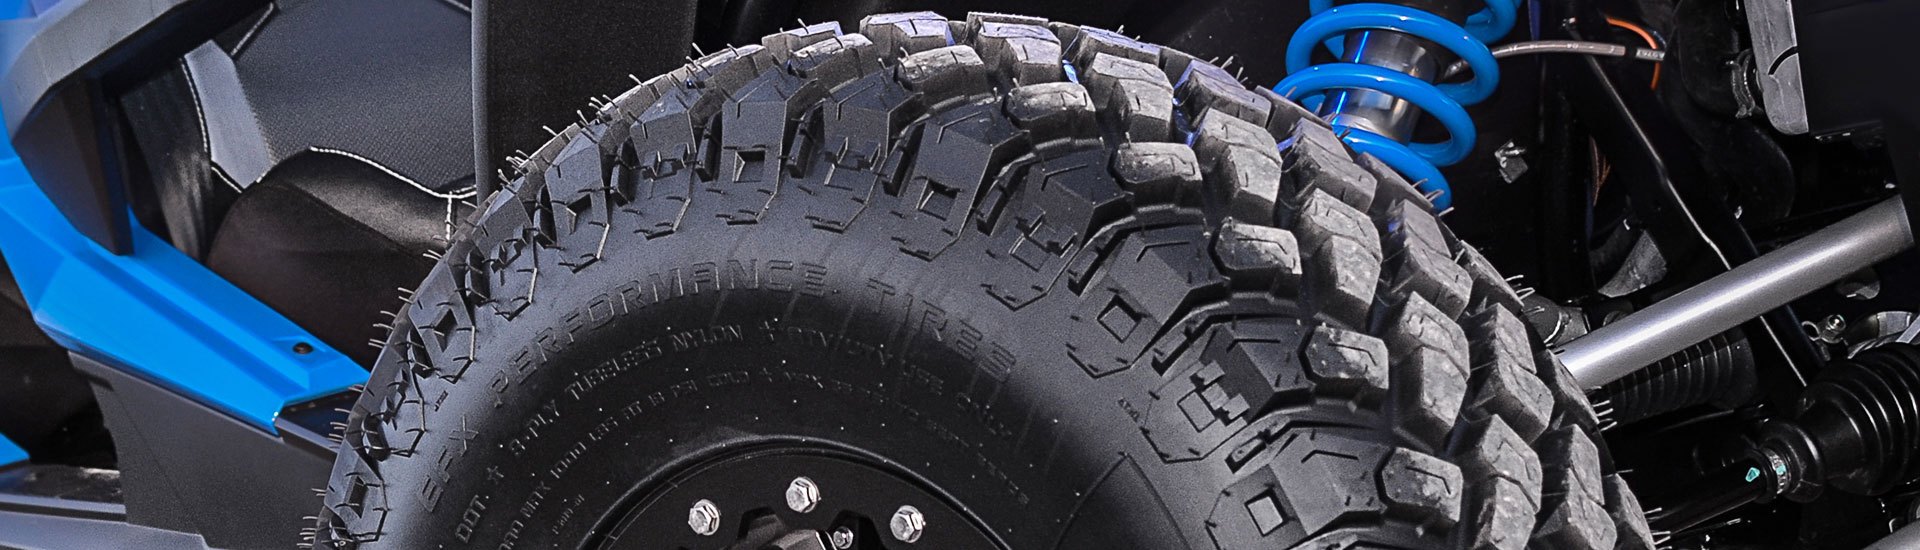 Powersports Motorcycle Tires